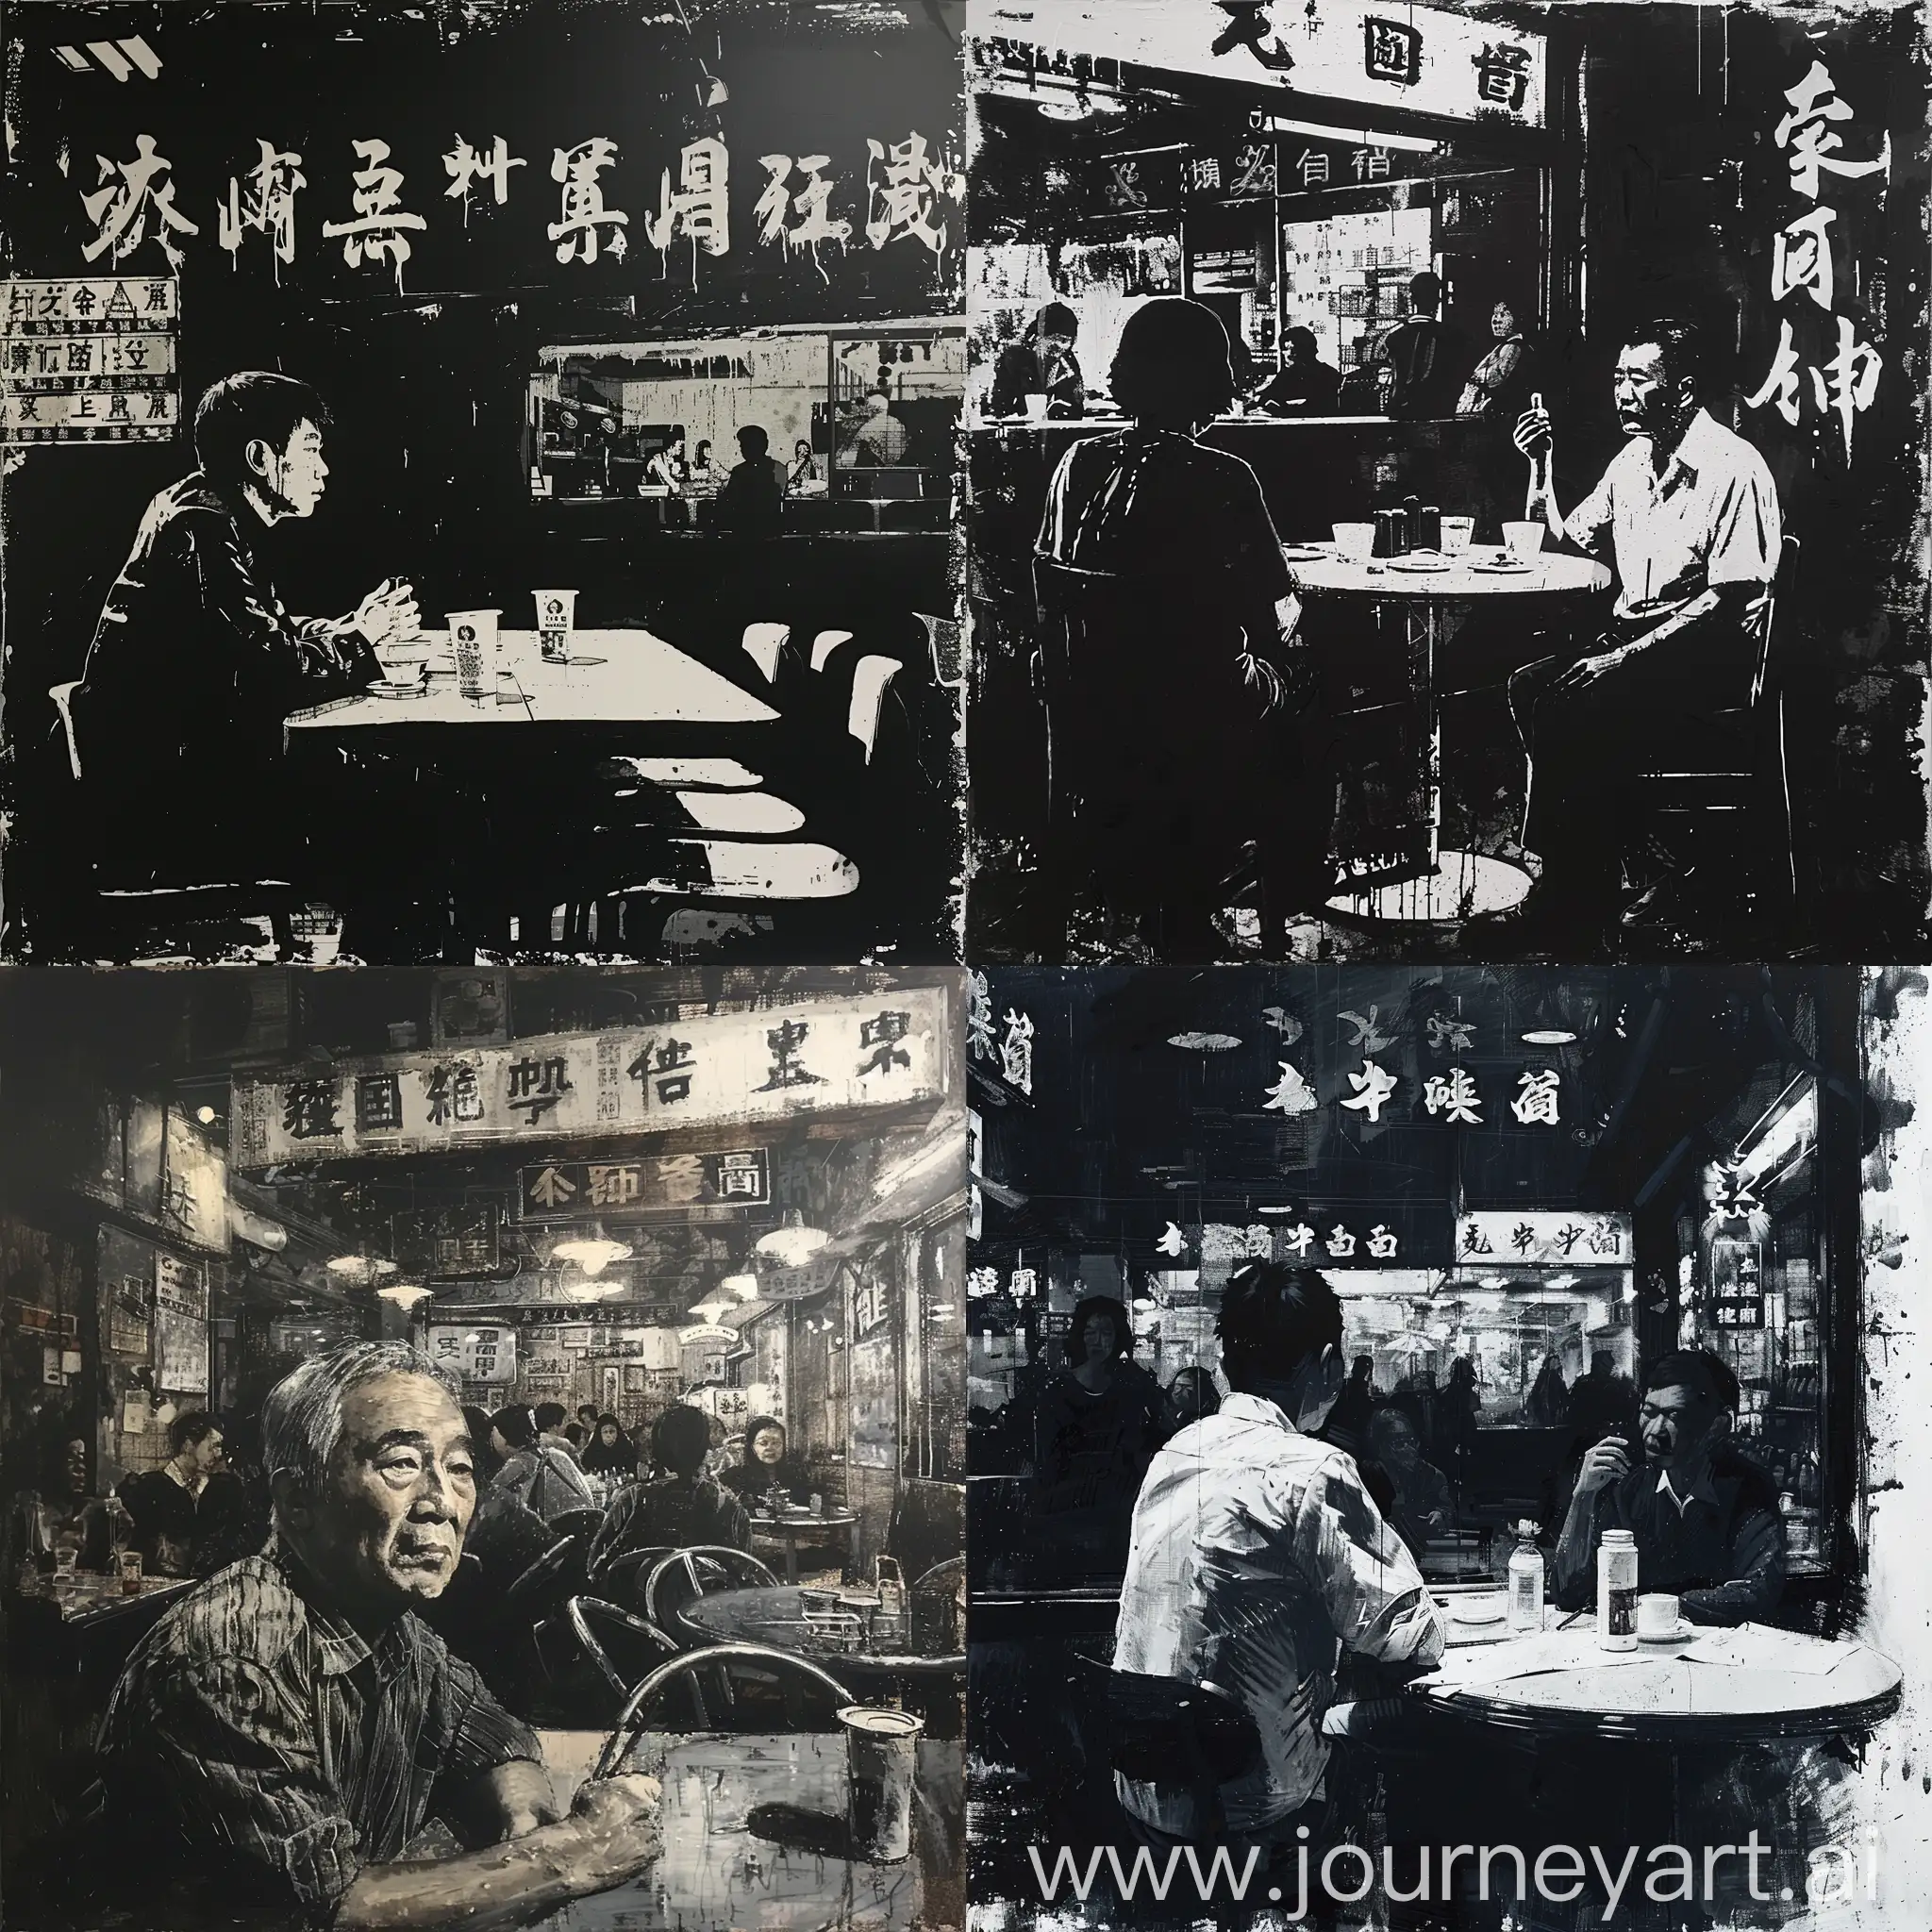 Chinese-Interviewed-in-a-Hong-Kong-Diner-Wong-Kar-Wais-Artistic-Portrait-in-Dry-Brush-Technique